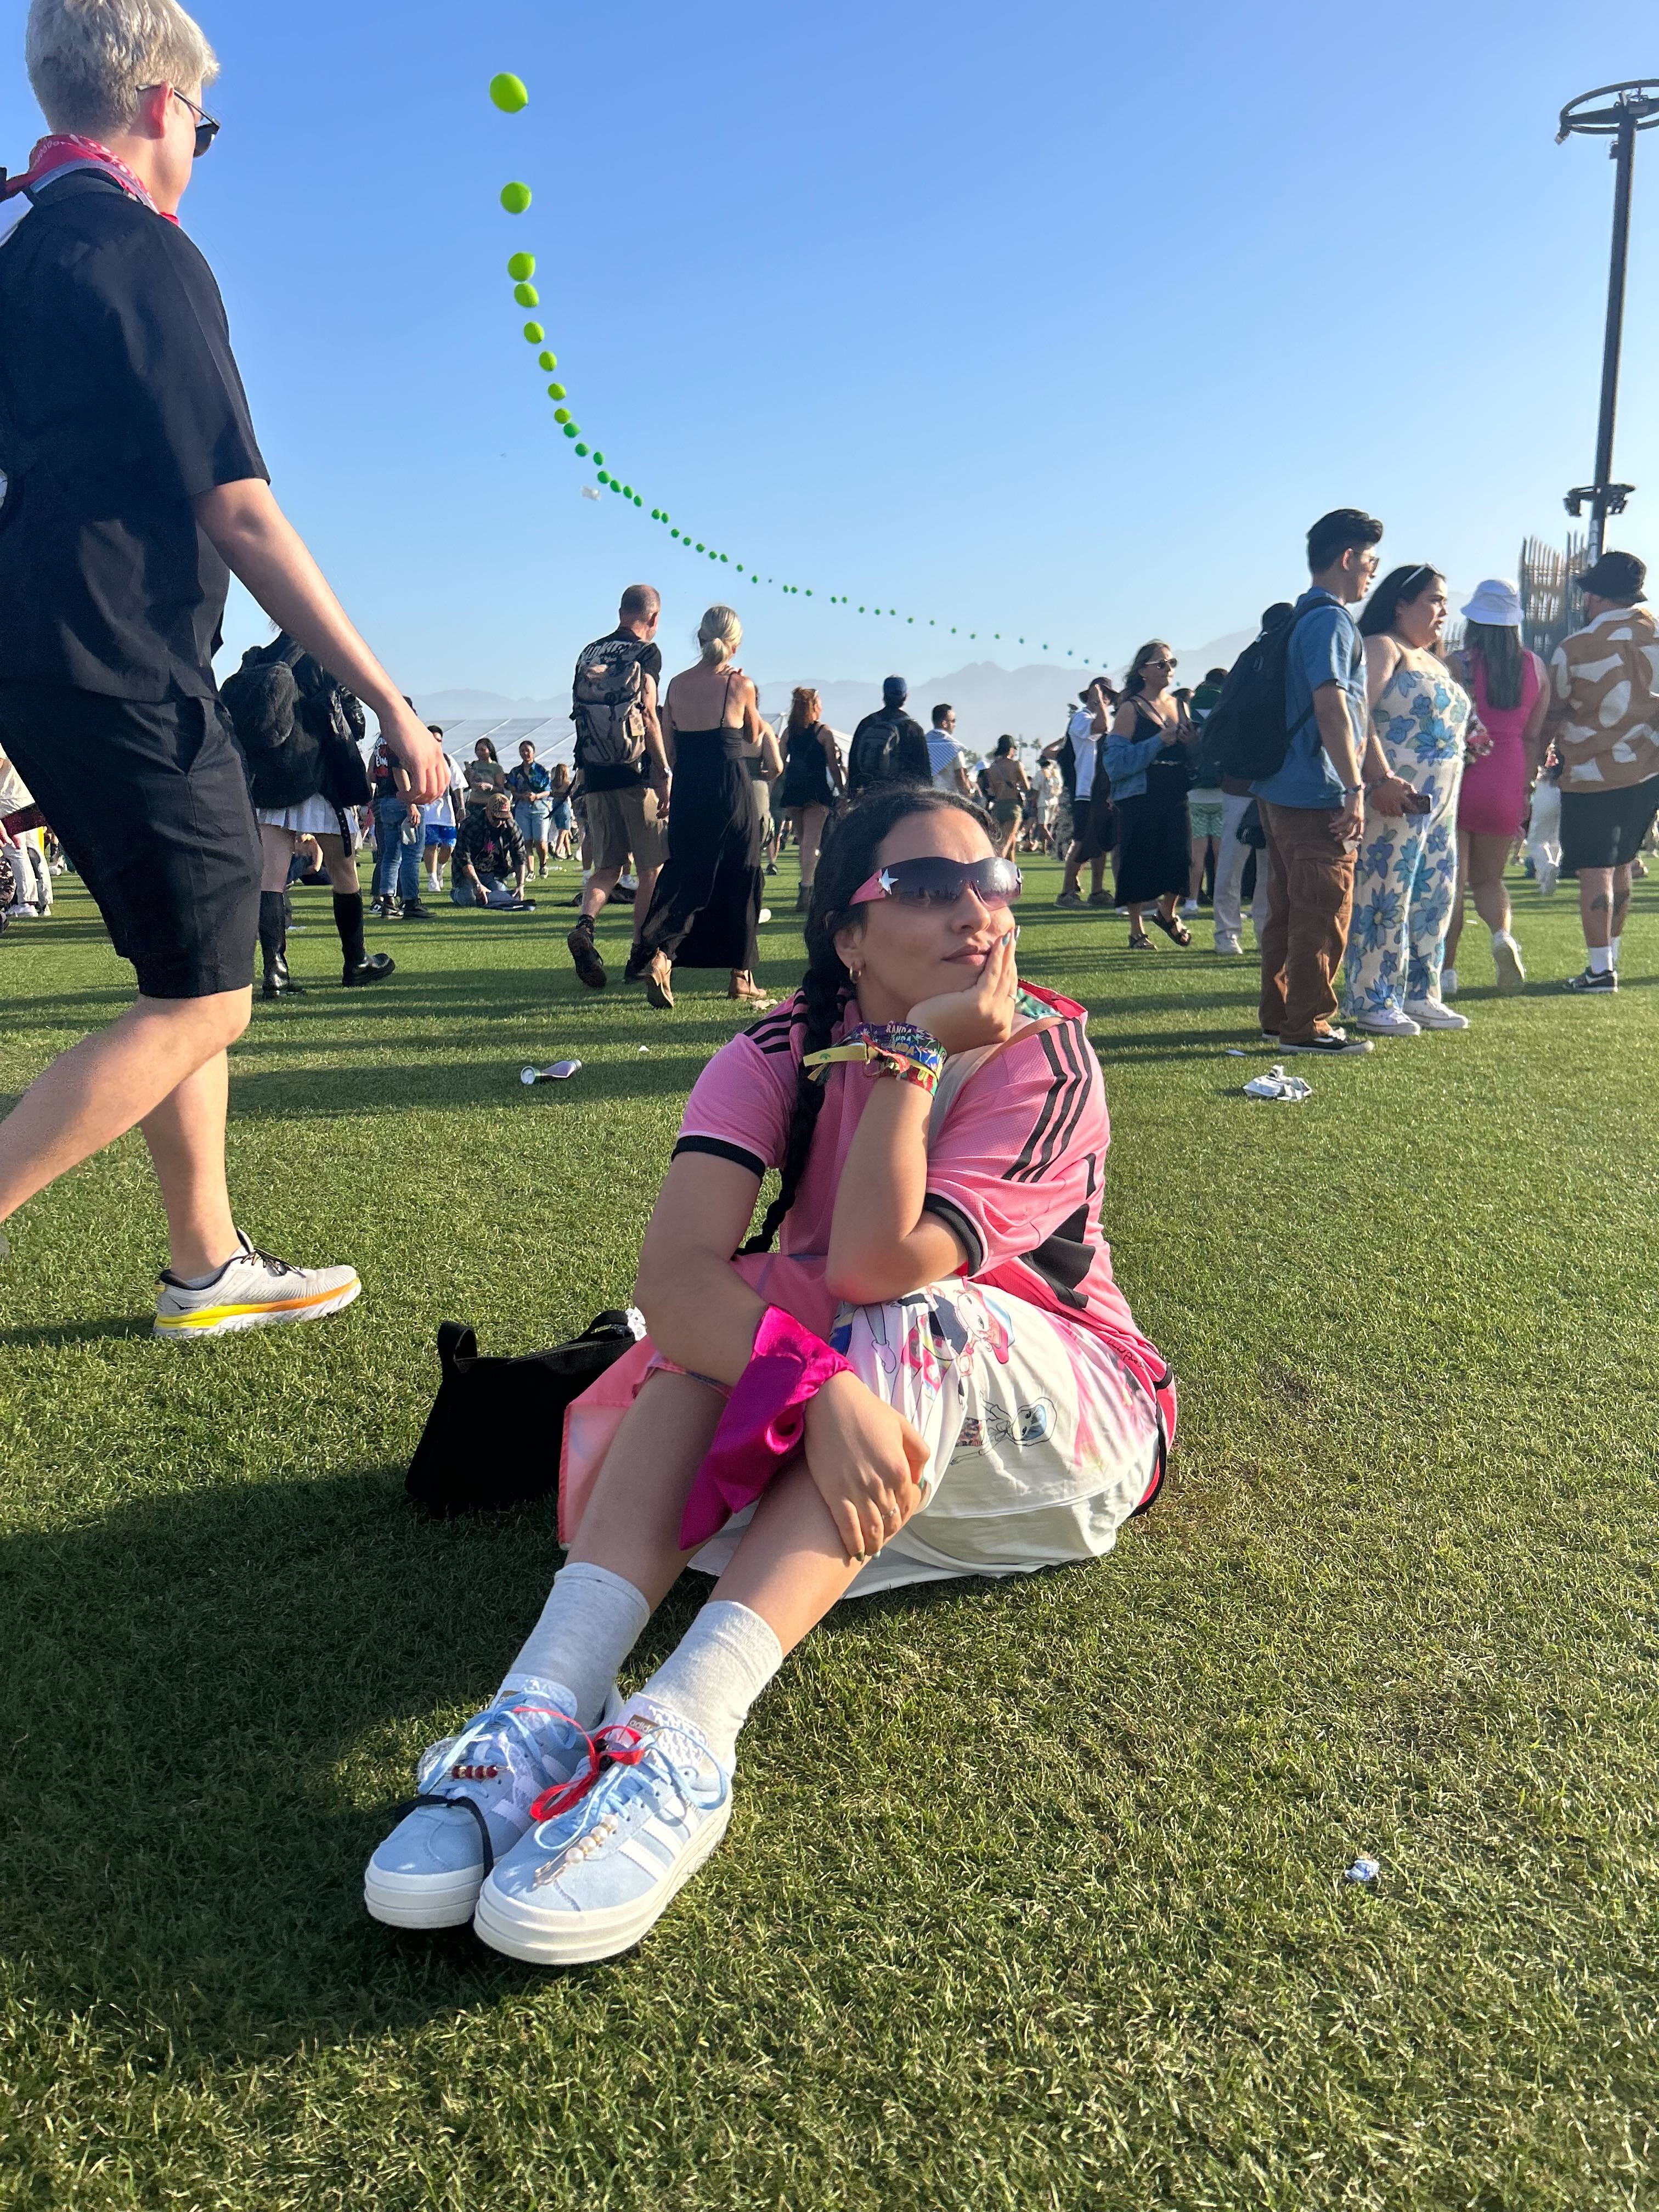 Influencer at Coachella wearing pink jersey, white midi skirt and custom Adidas sneakers with ribbons.